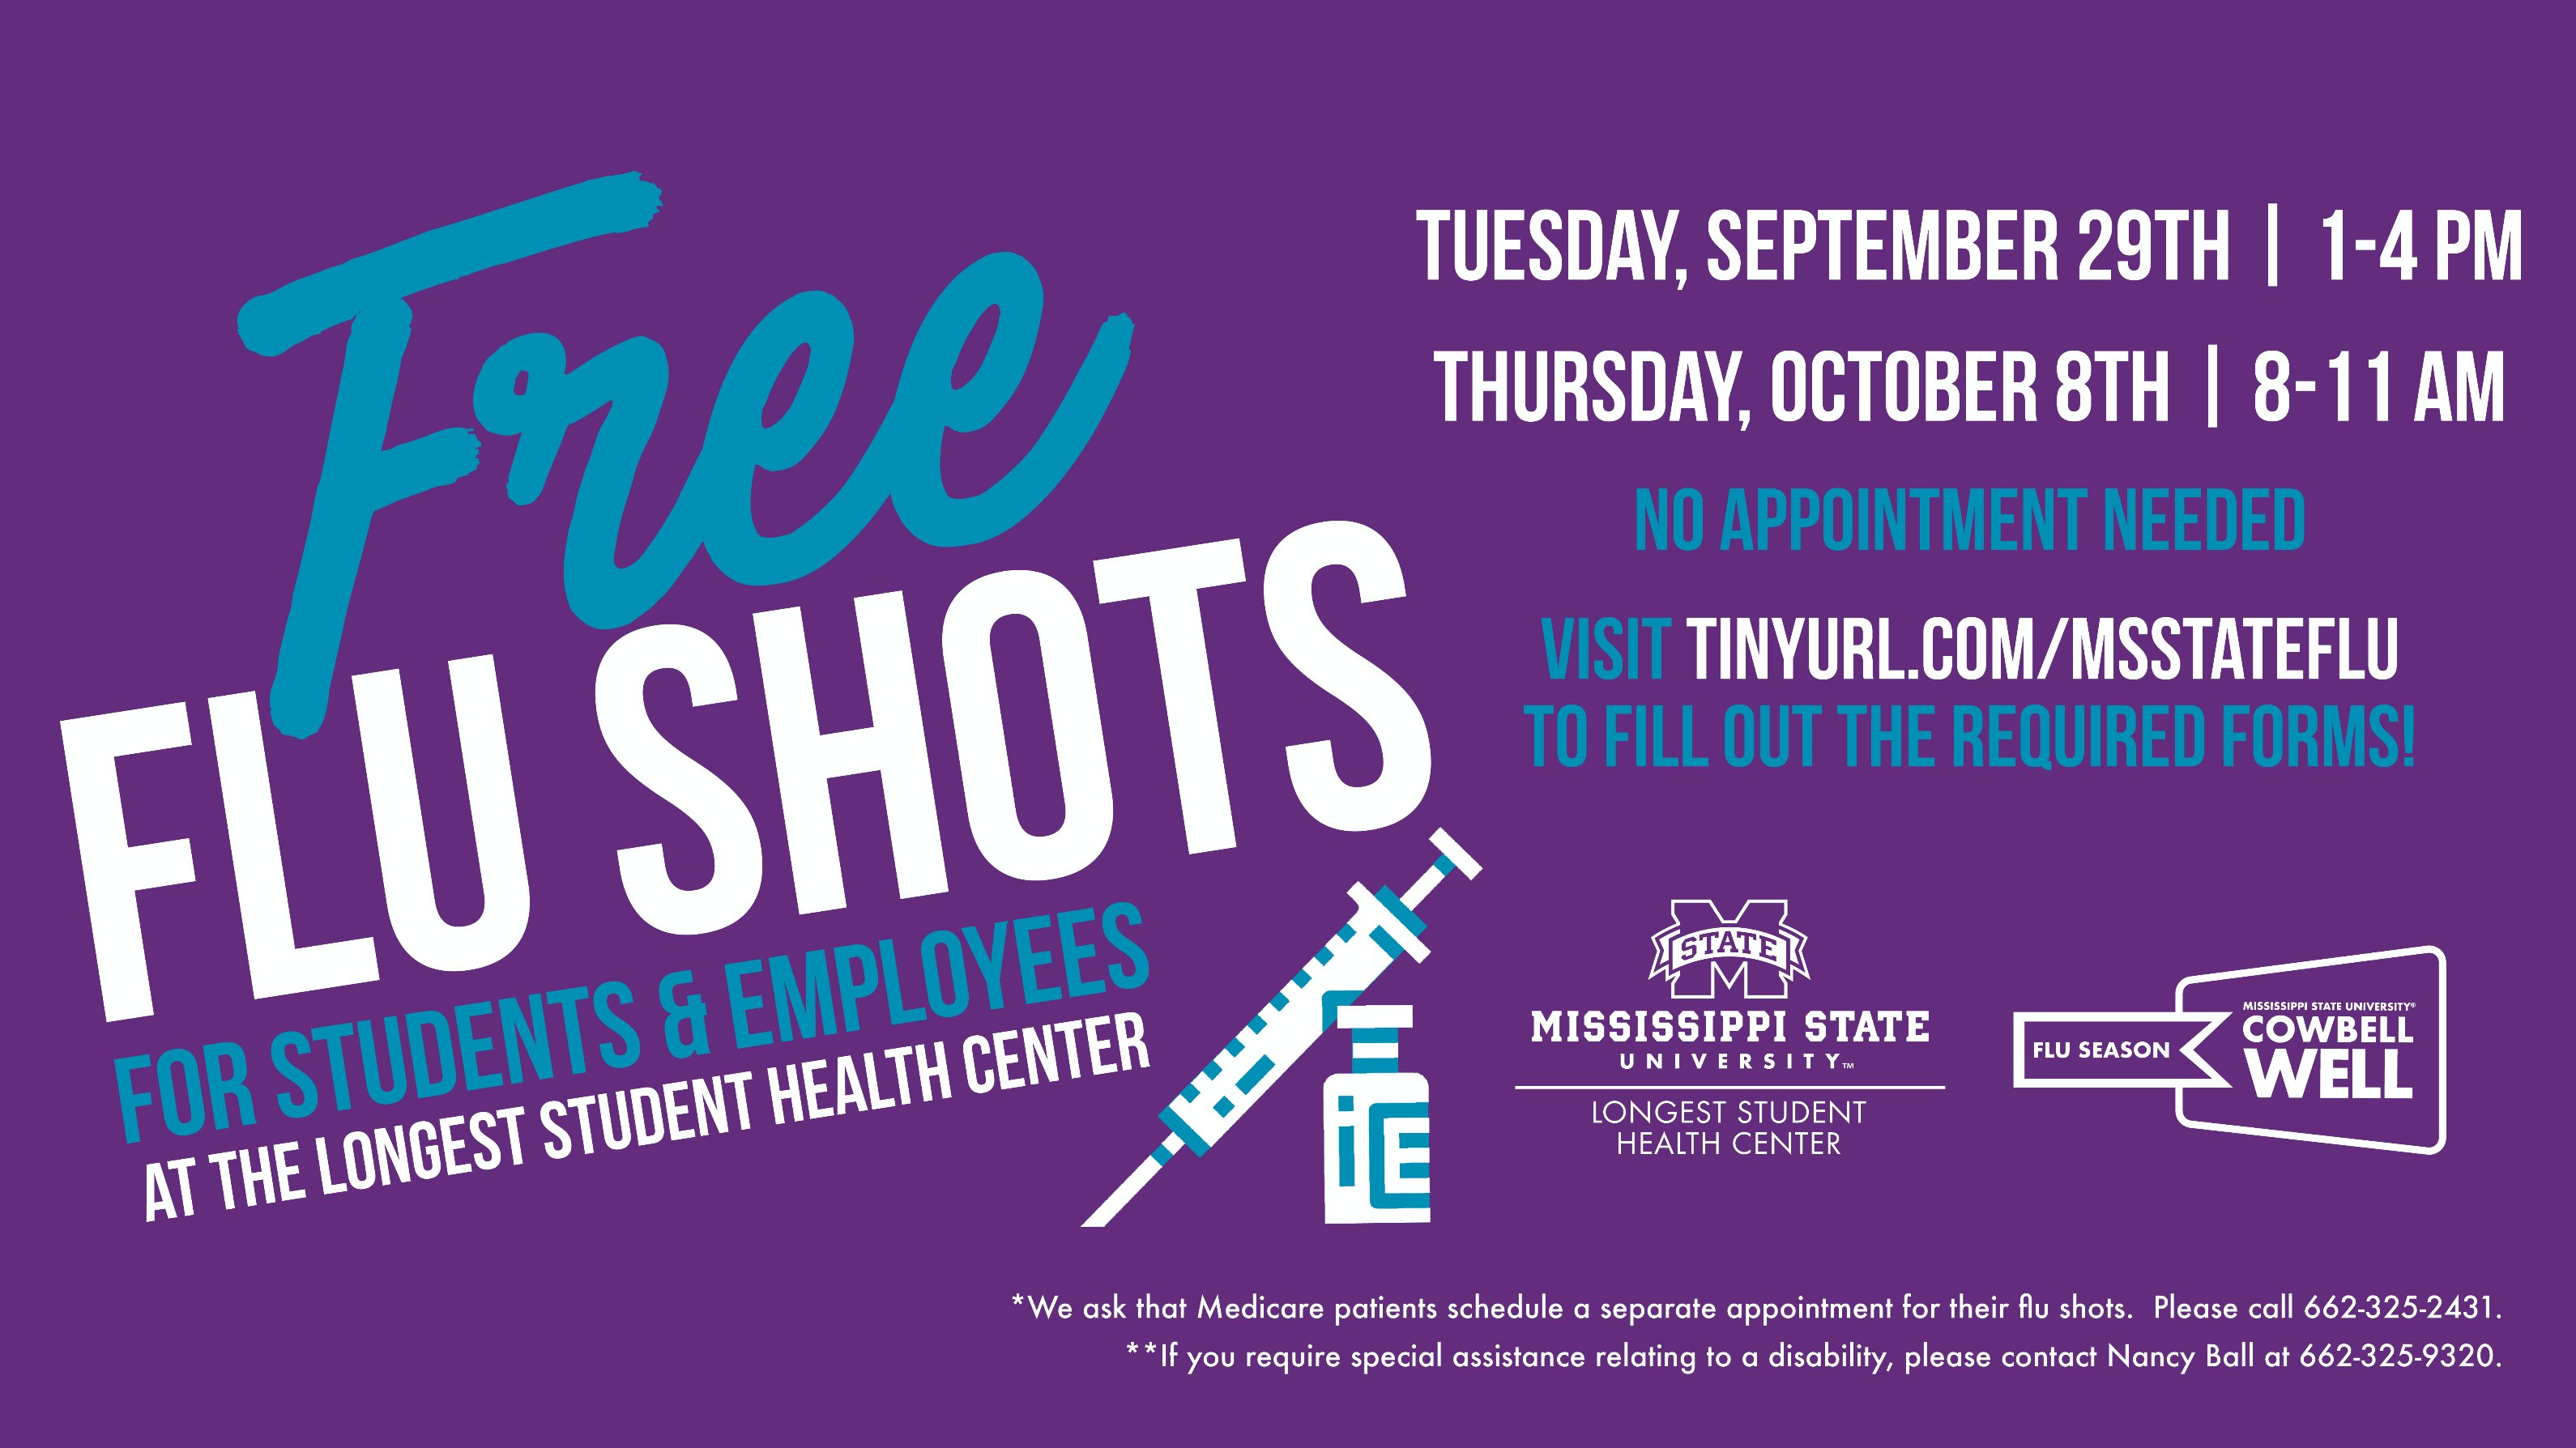 Blue and purple graphic promoting free flu shot clinics for MSU students and employees